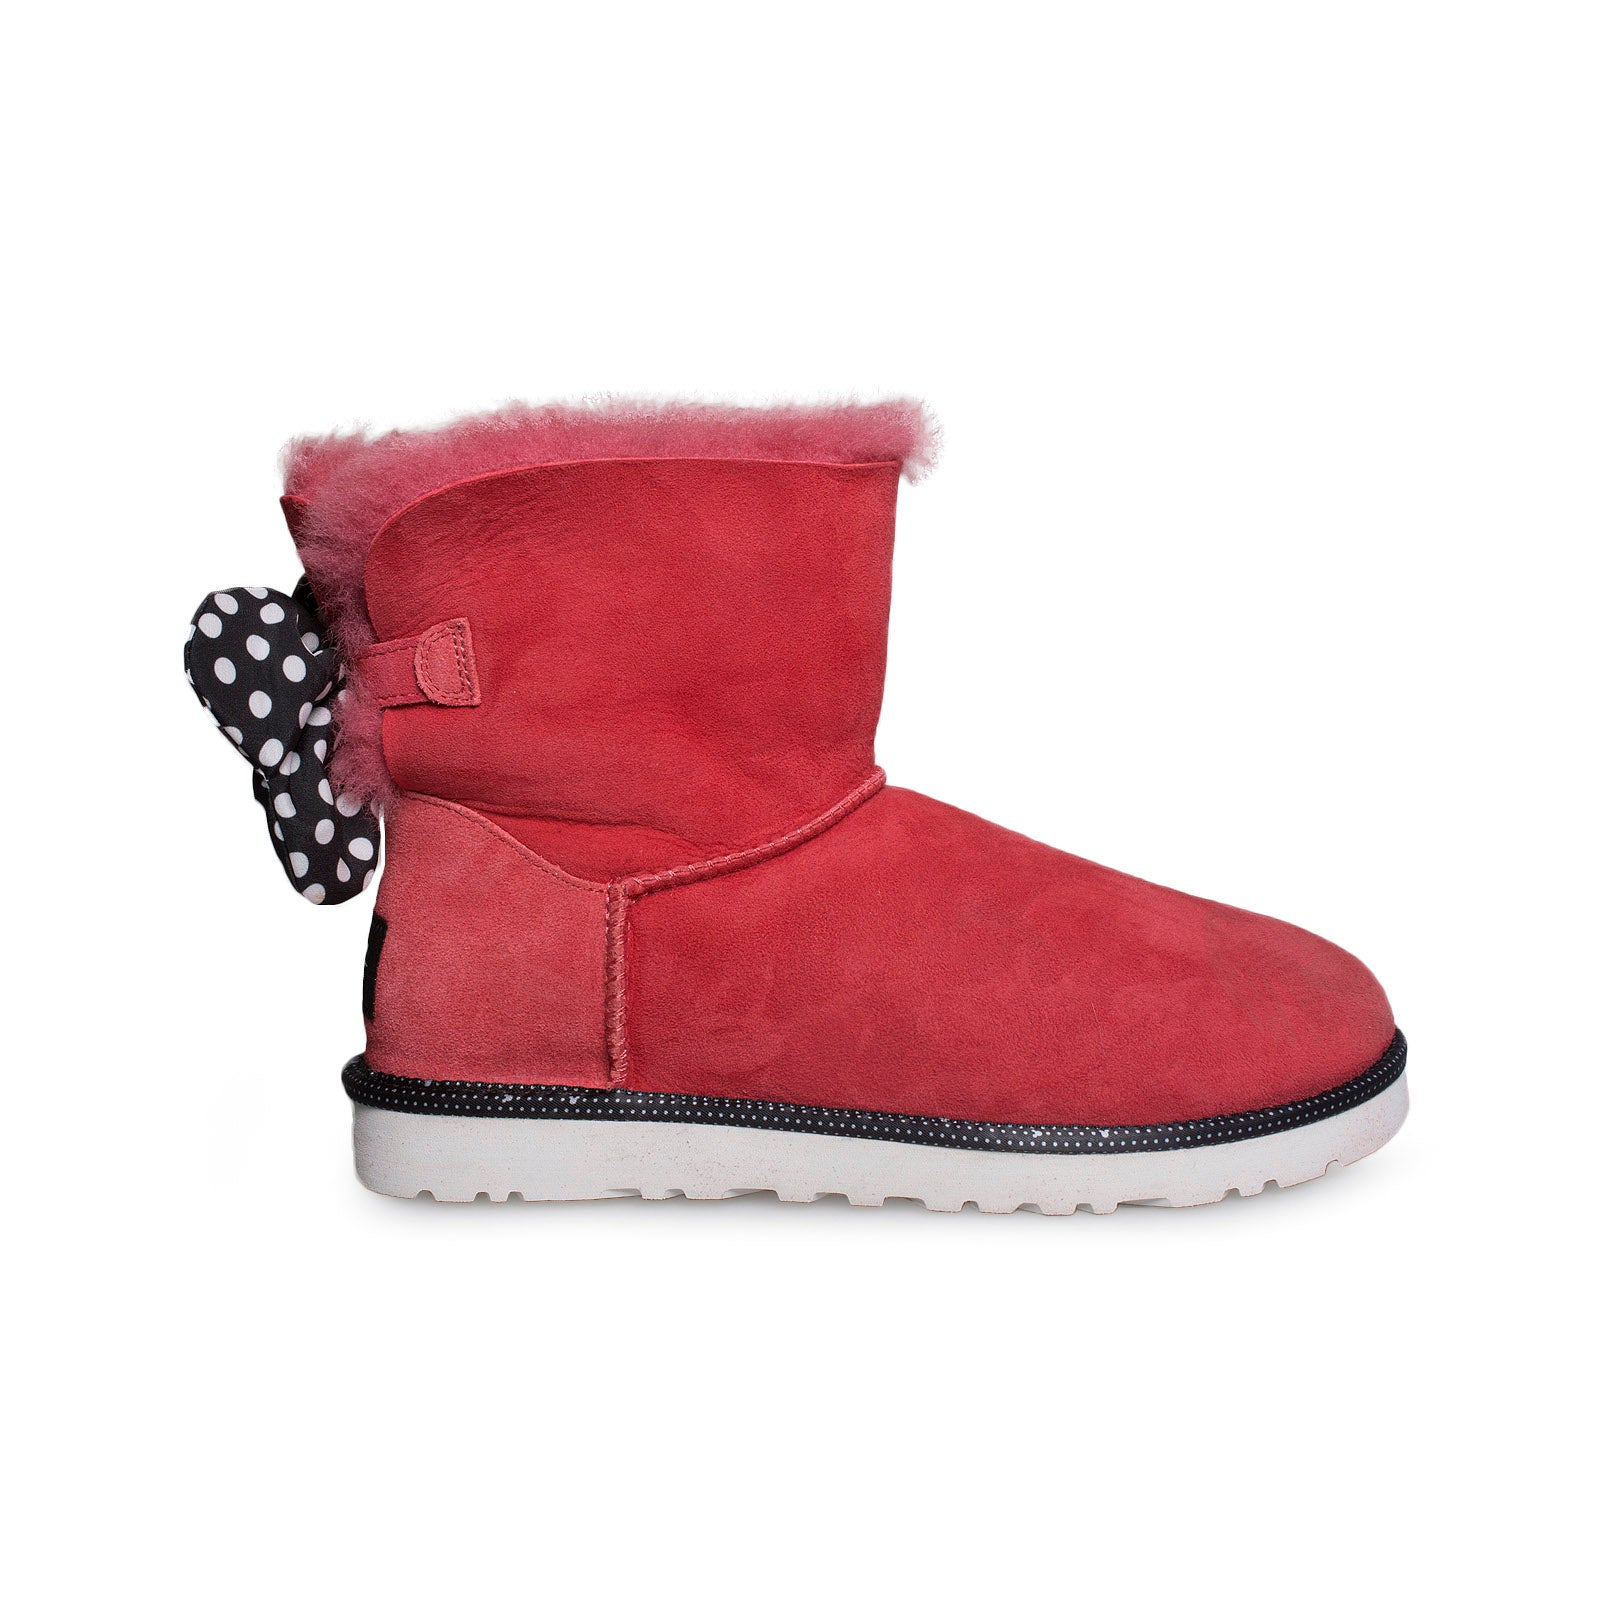 UGG Sweetie Bow Red Boots - Women's - MyCozyBoots